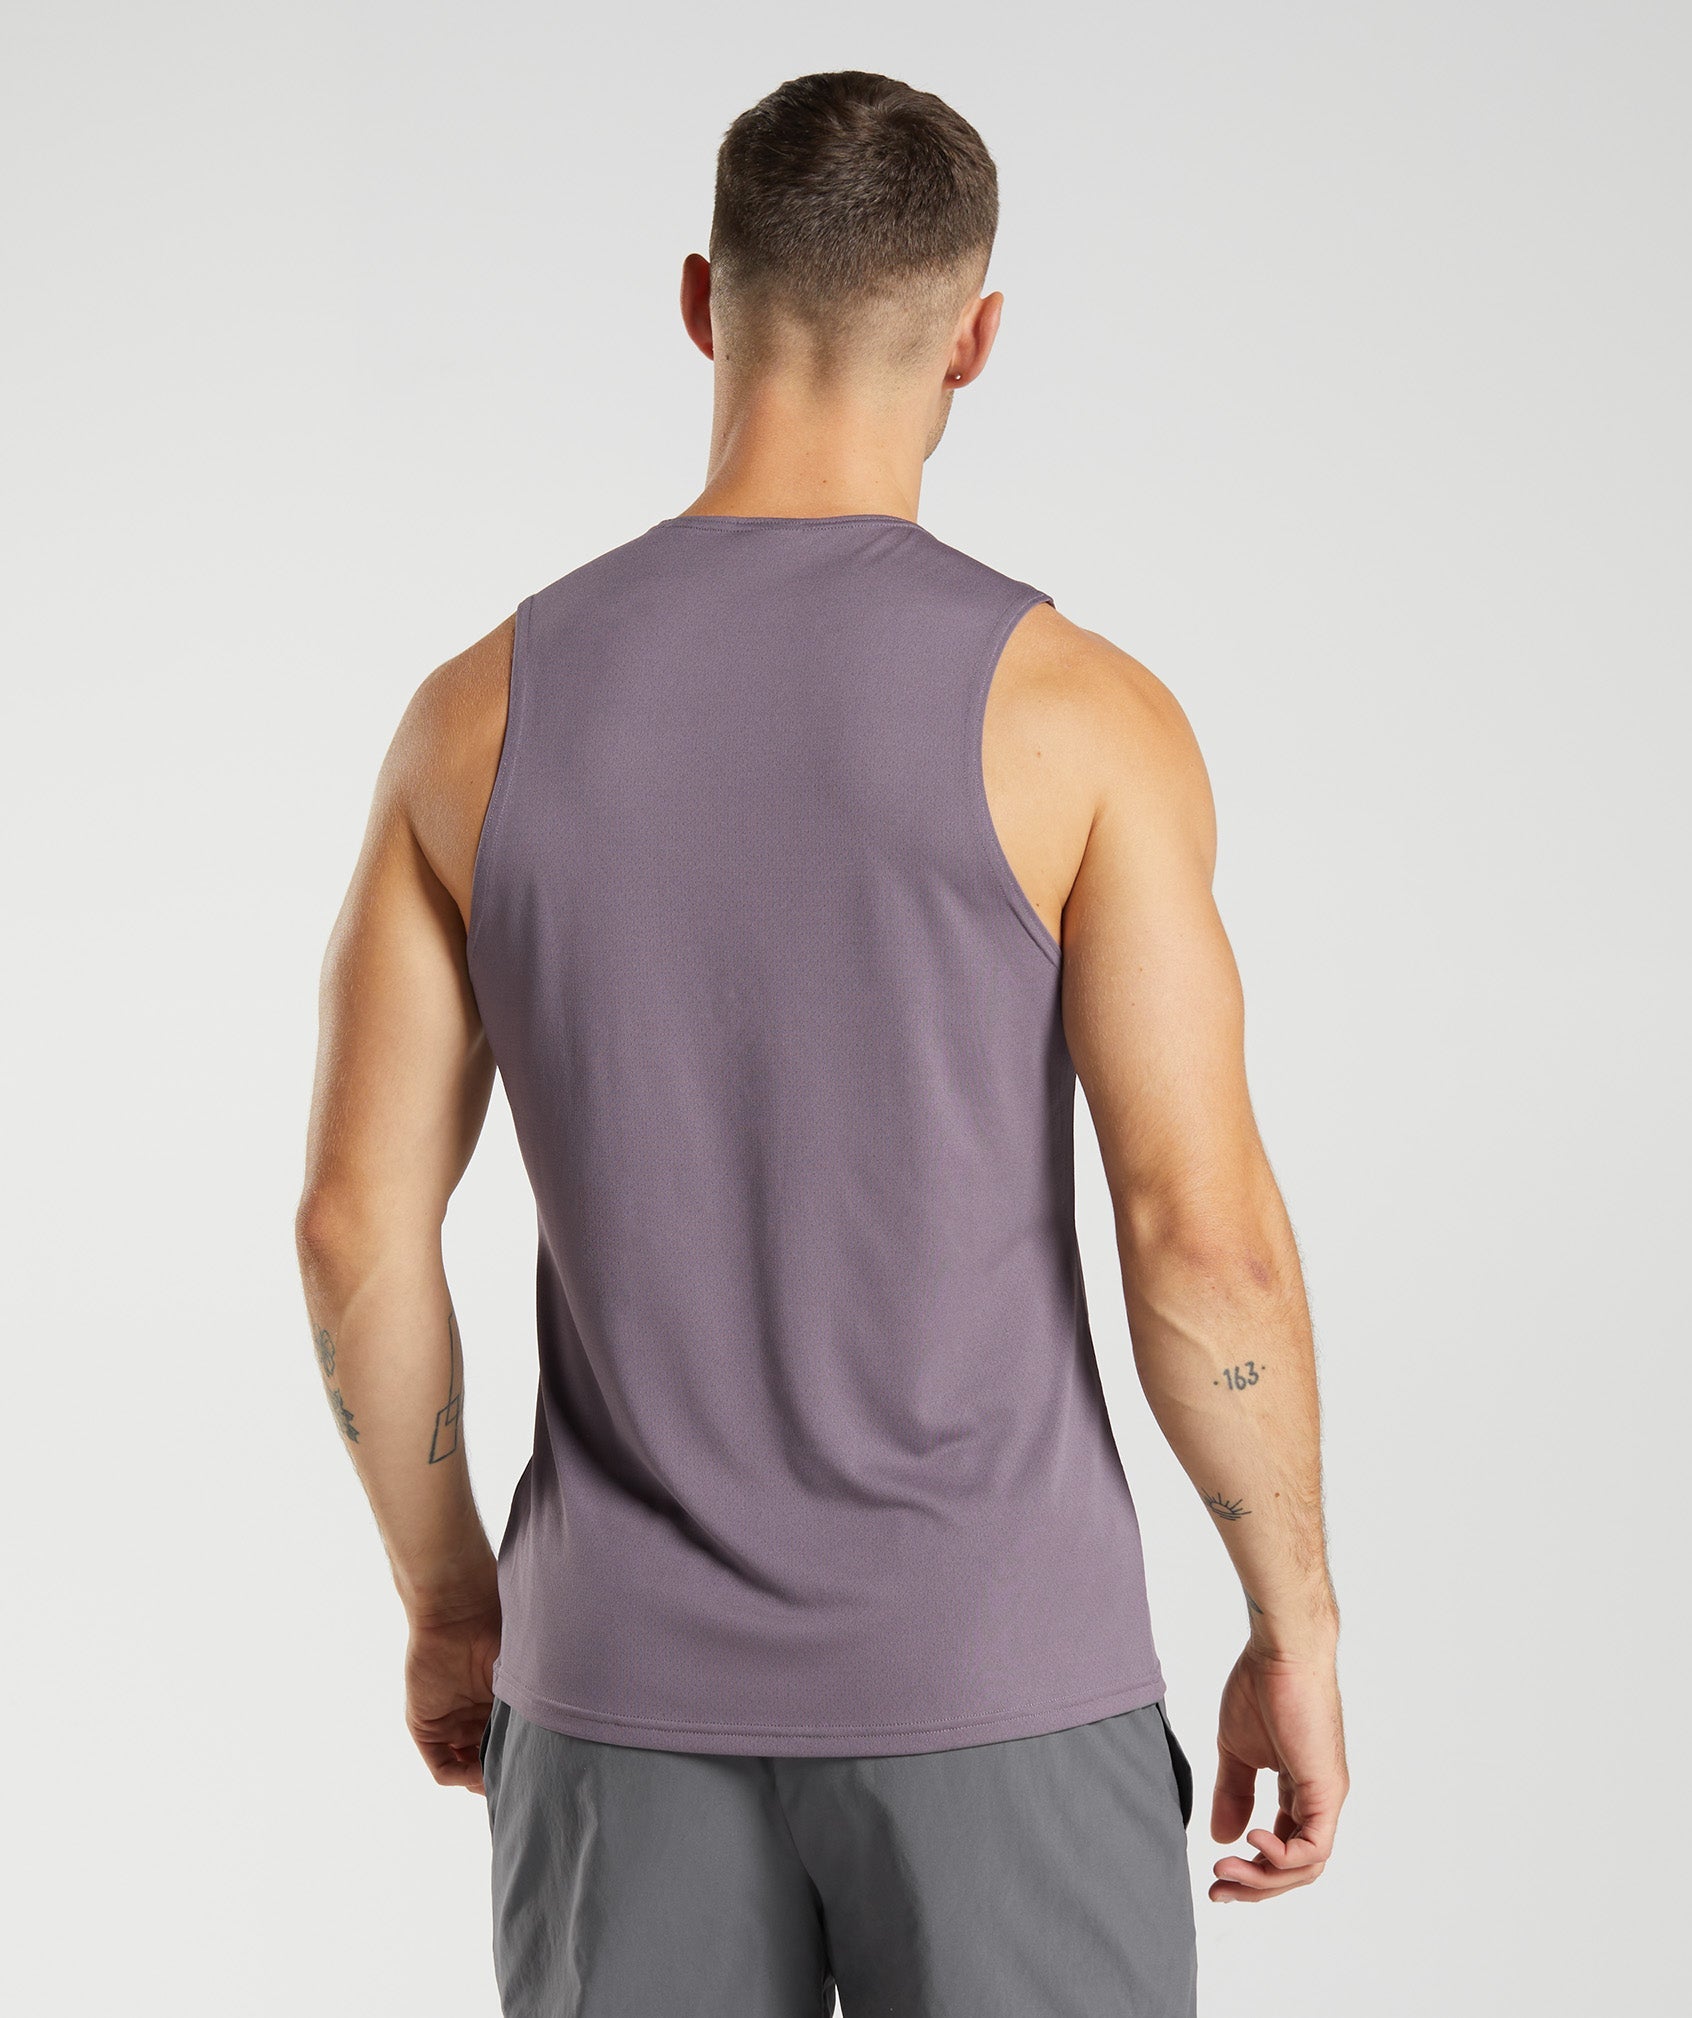 Arrival Tank in Musk Lilac - view 2